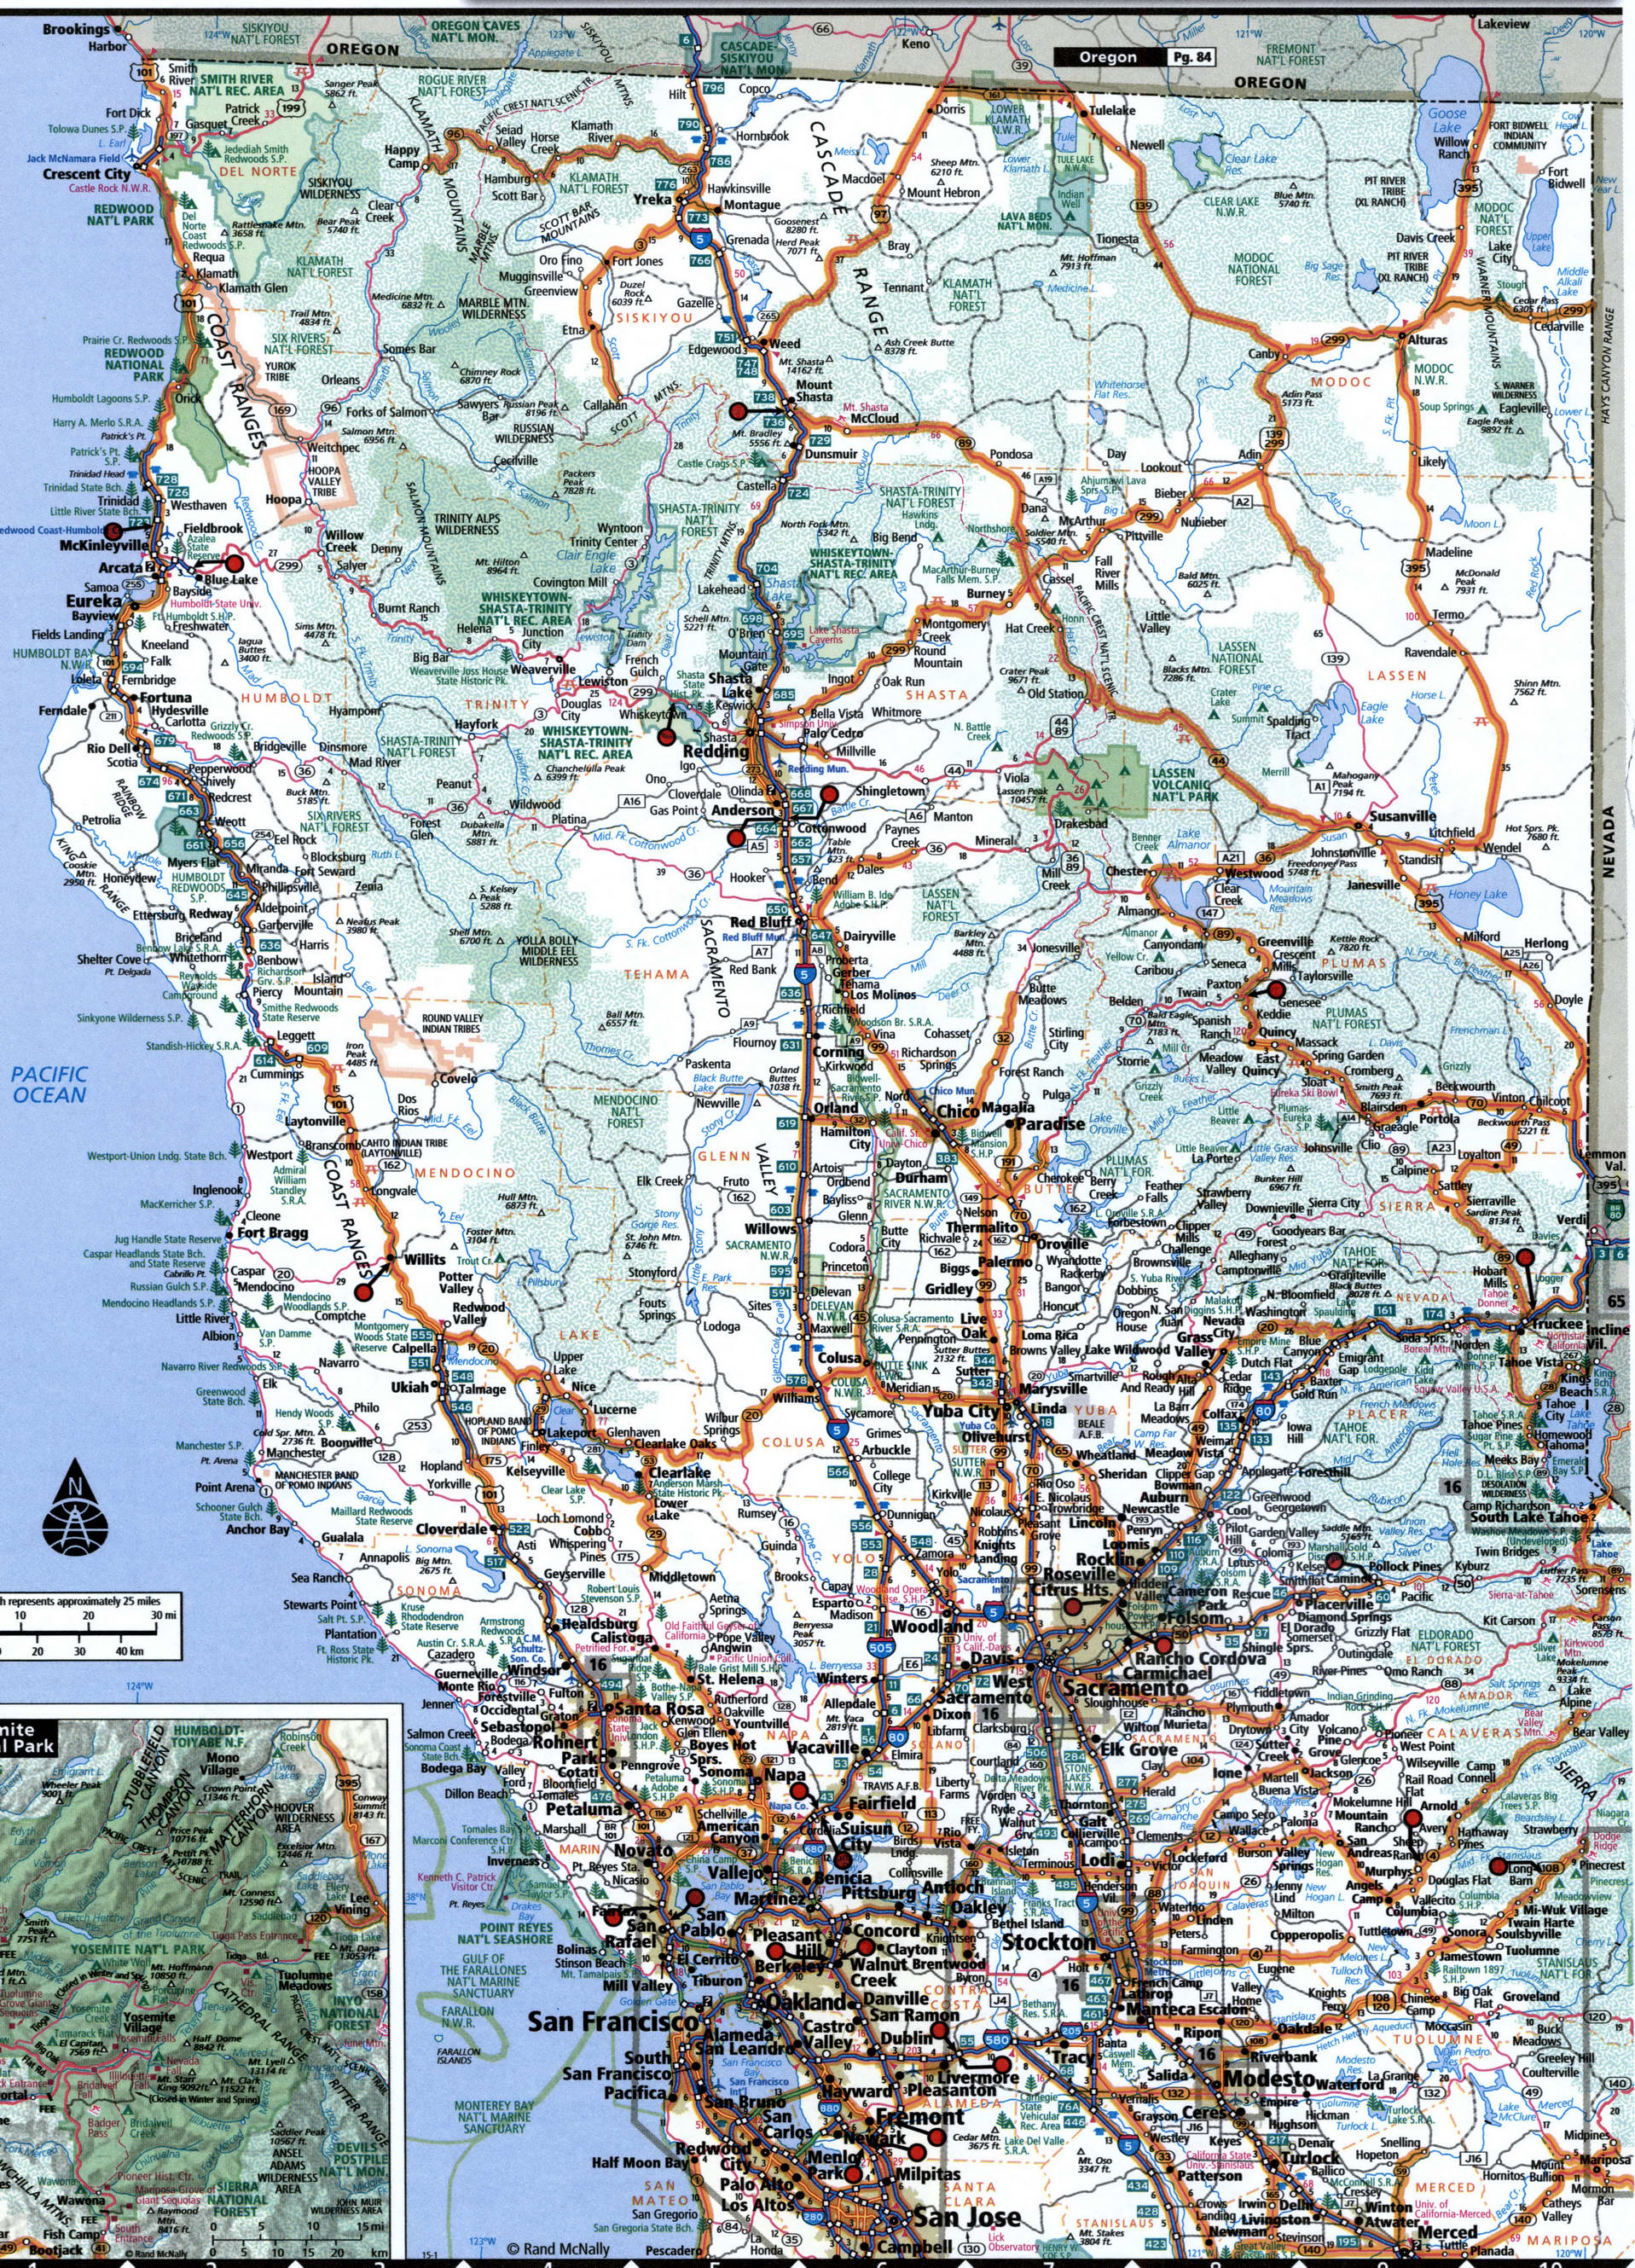 North California map for truckers